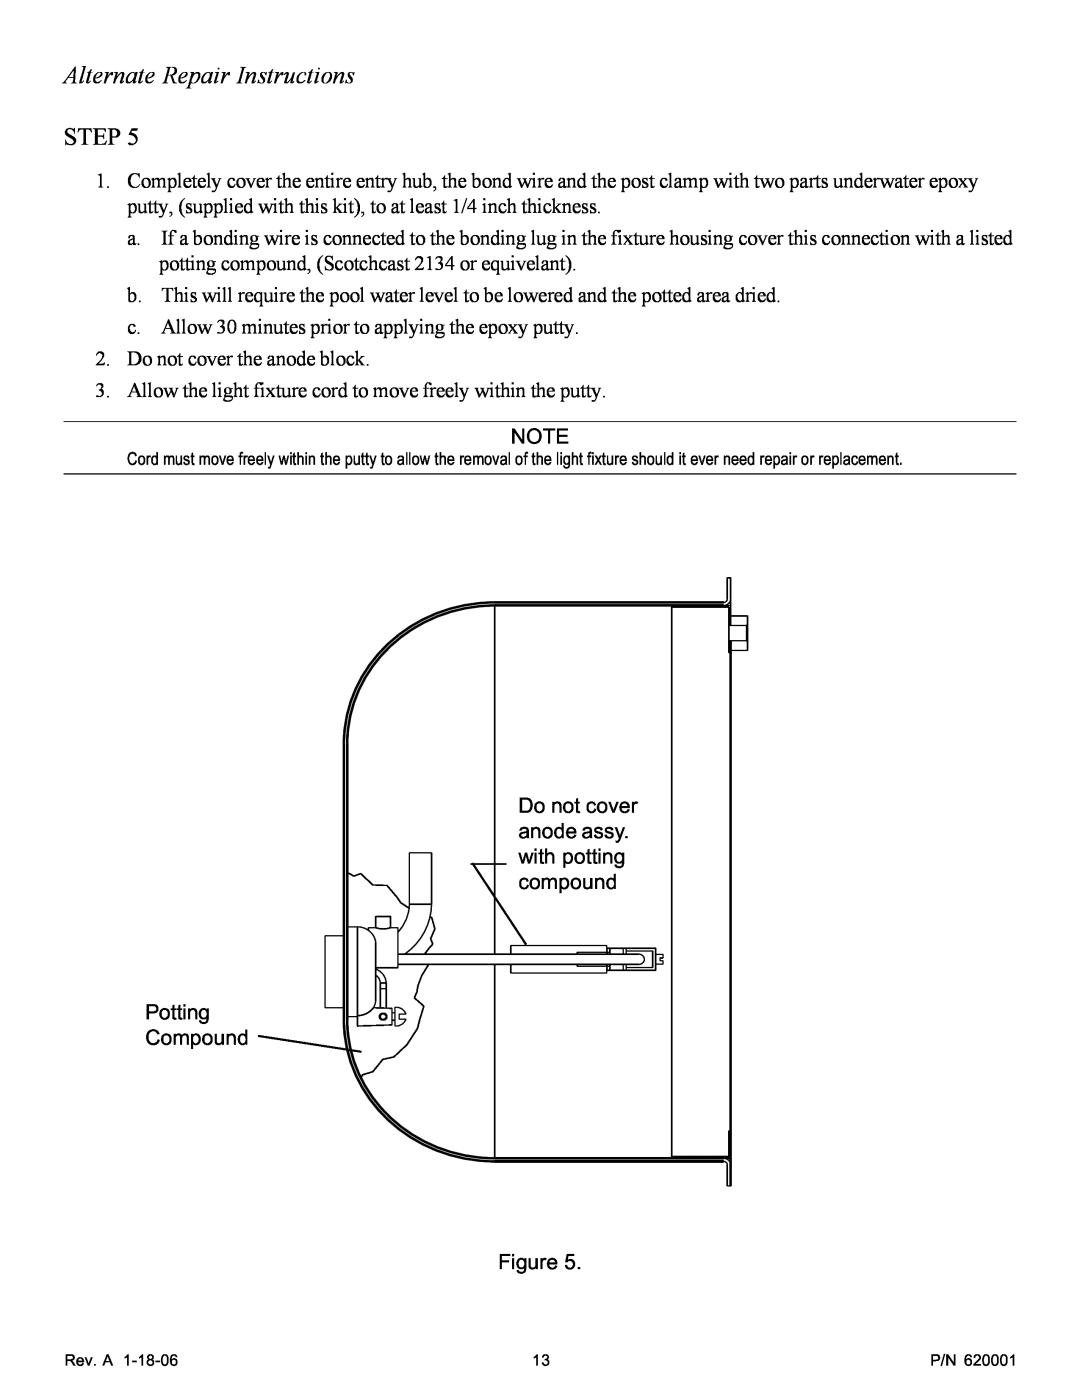 Pentair 620001 Alternate Repair Instructions, Step, Do not cover anode assy. with potting compound Potting Compound 